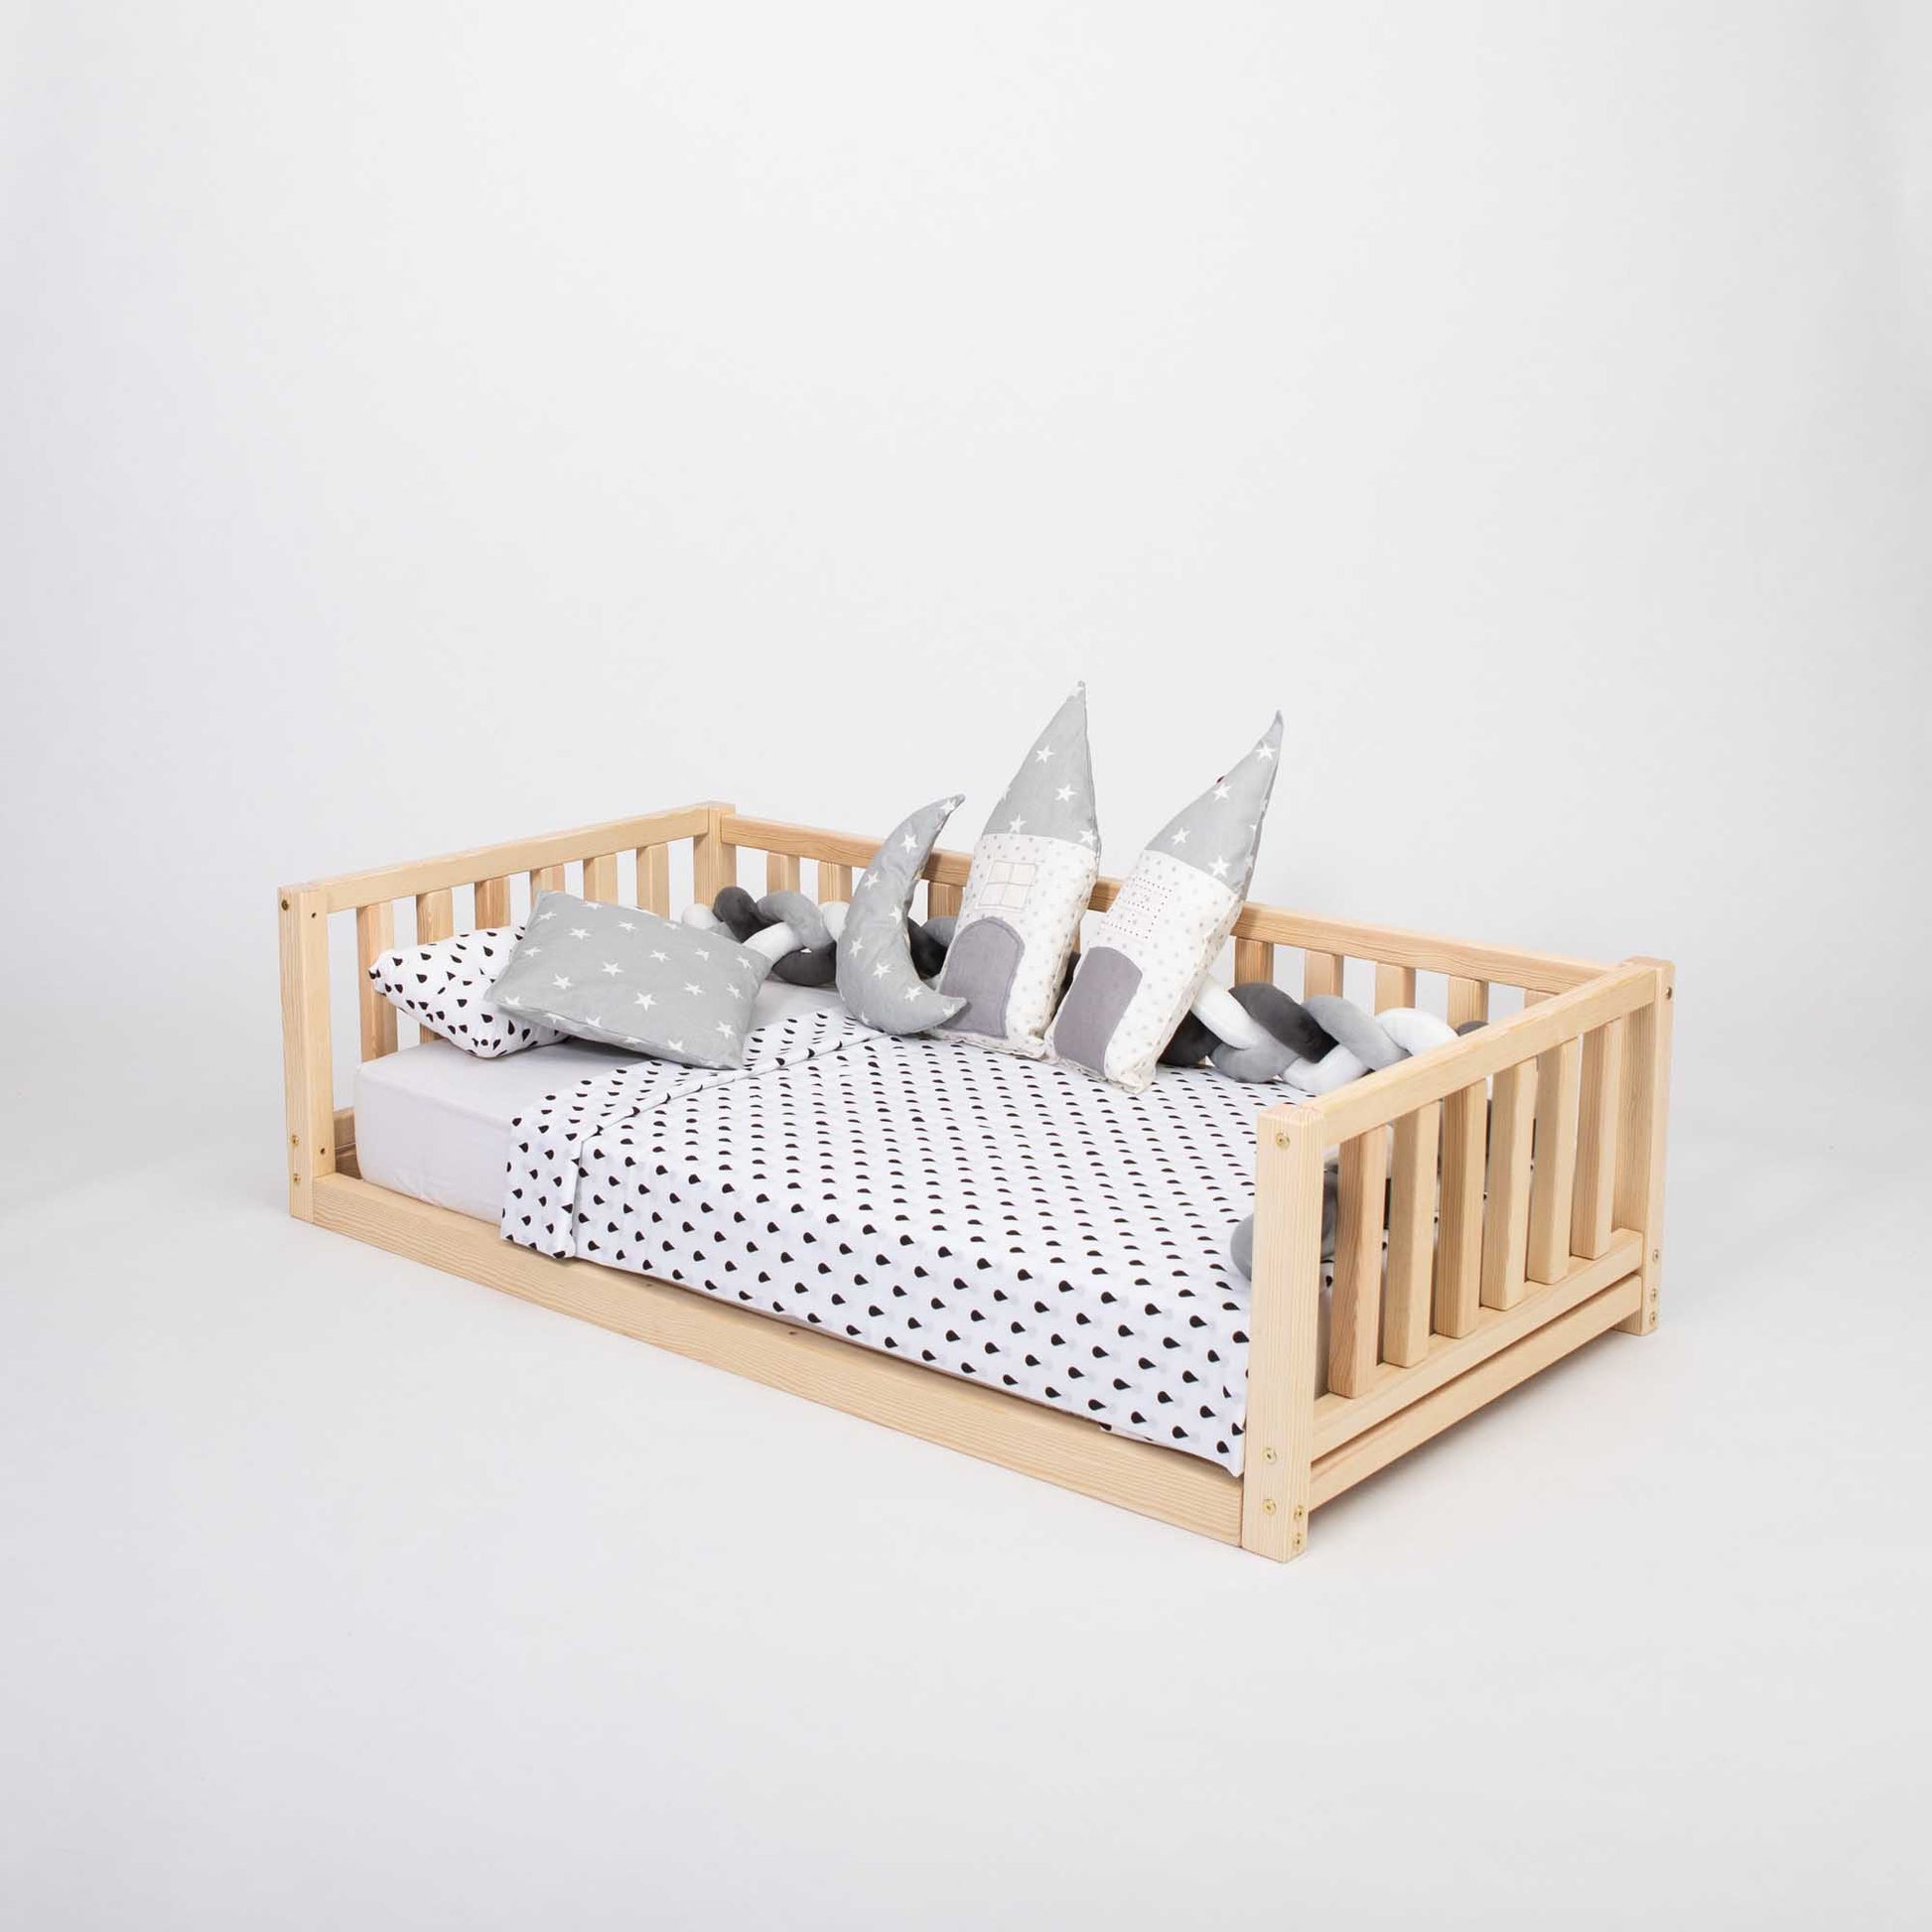 This 2-in-1 toddler bed on legs with a 3-sided vertical rail from Sweet Home From Wood features polka dot pillows and a wooden frame made of solid pine or birch wood. It is designed as a floor-level bed for toddlers.